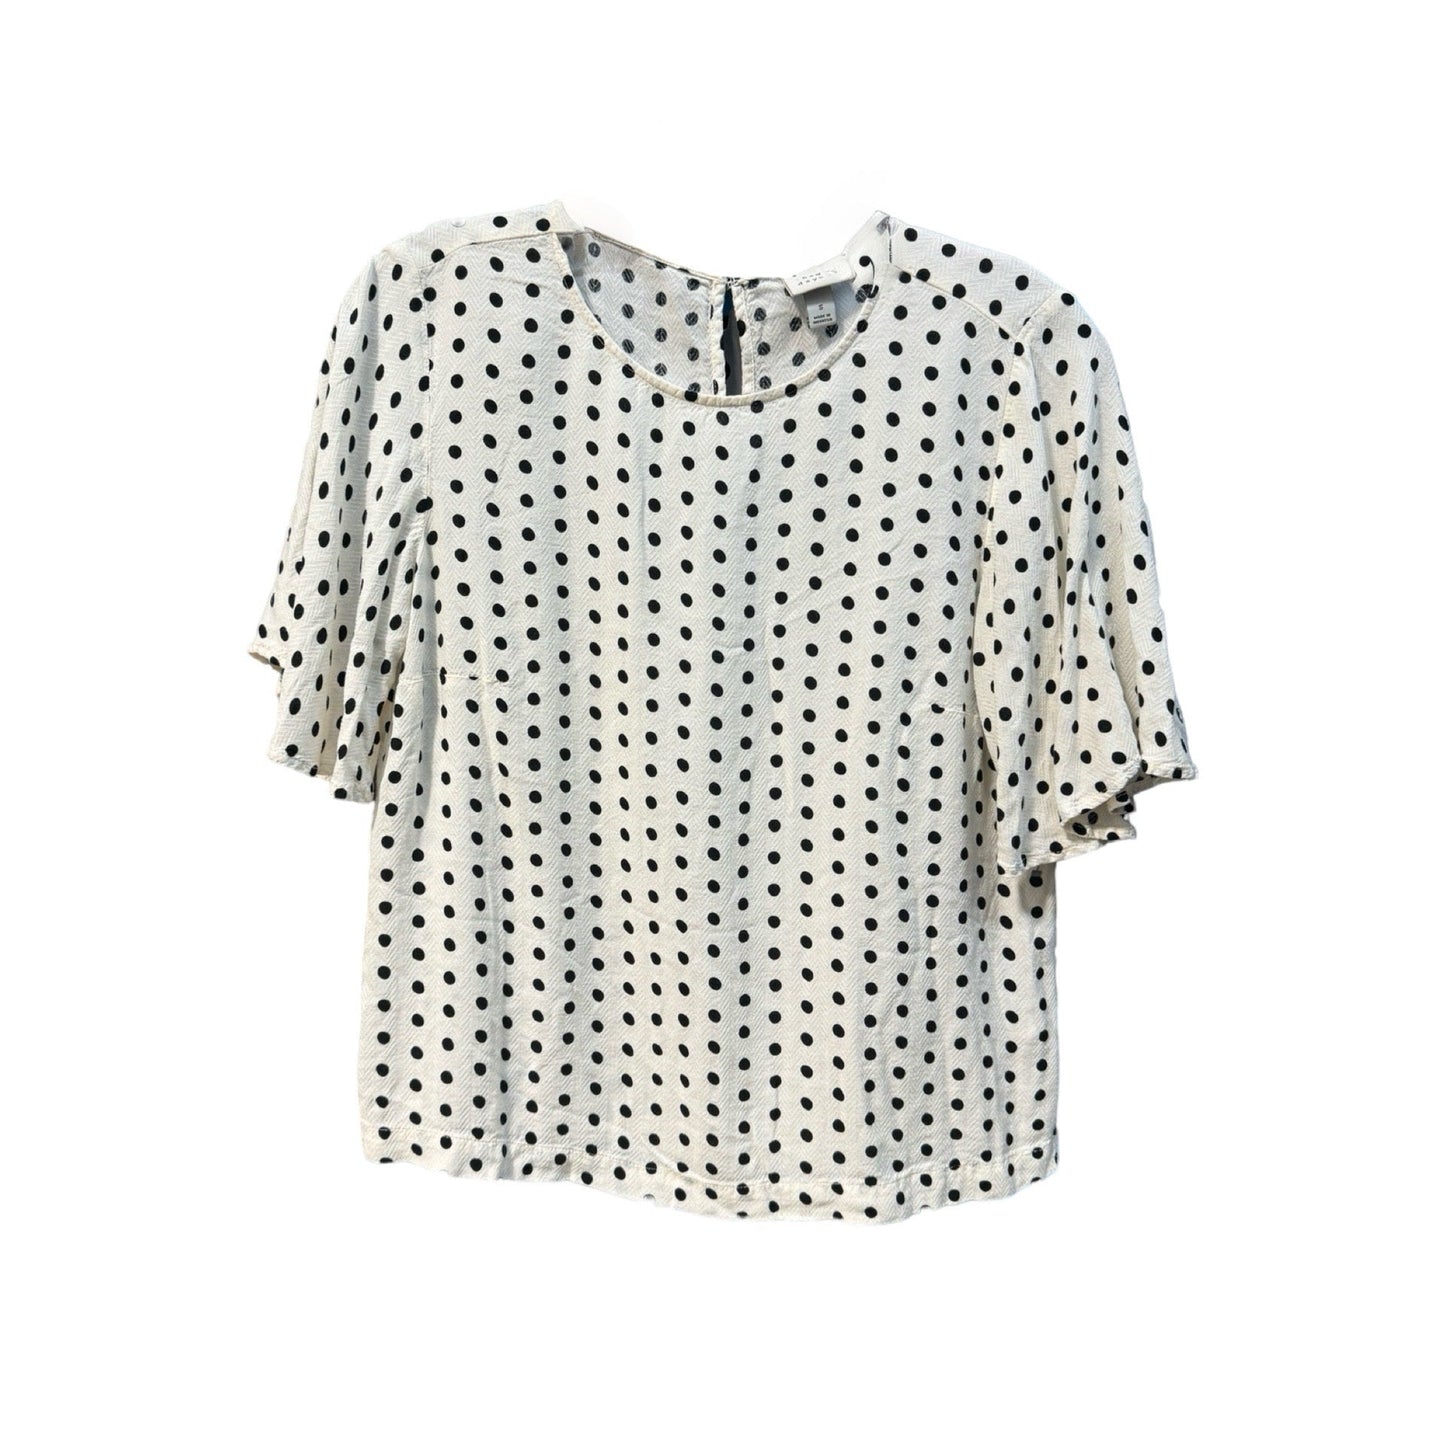 Polkadot Top Short Sleeve A New Day, Size S